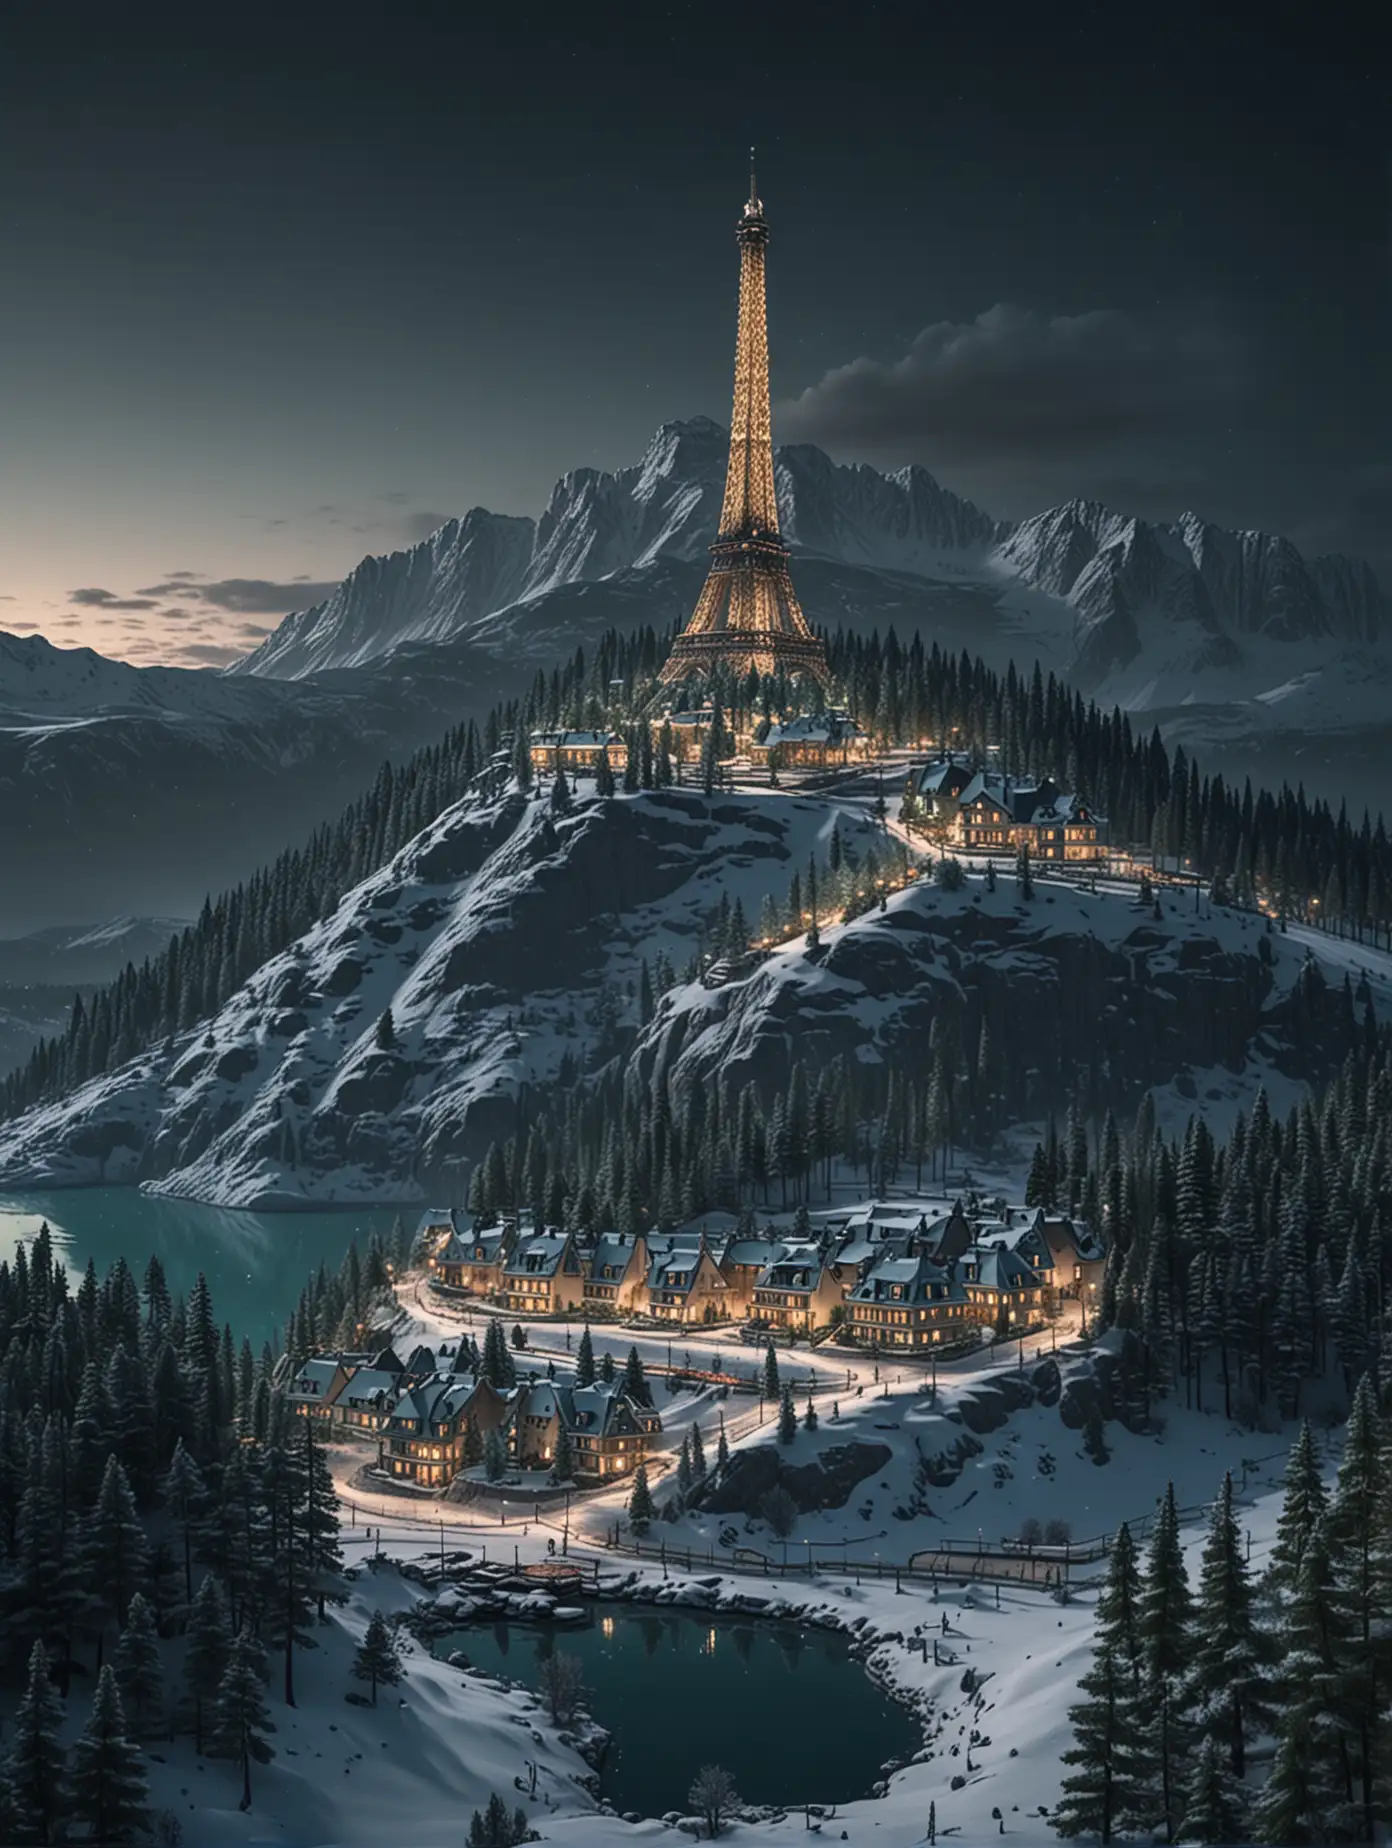 Create a part of a snow mountain with tall green pine trees, lighted houses from top to bottom of mountain, eiffel tower in distance, cyan lake at the bottom, dusk, very dark shades, photo realistic, 4k